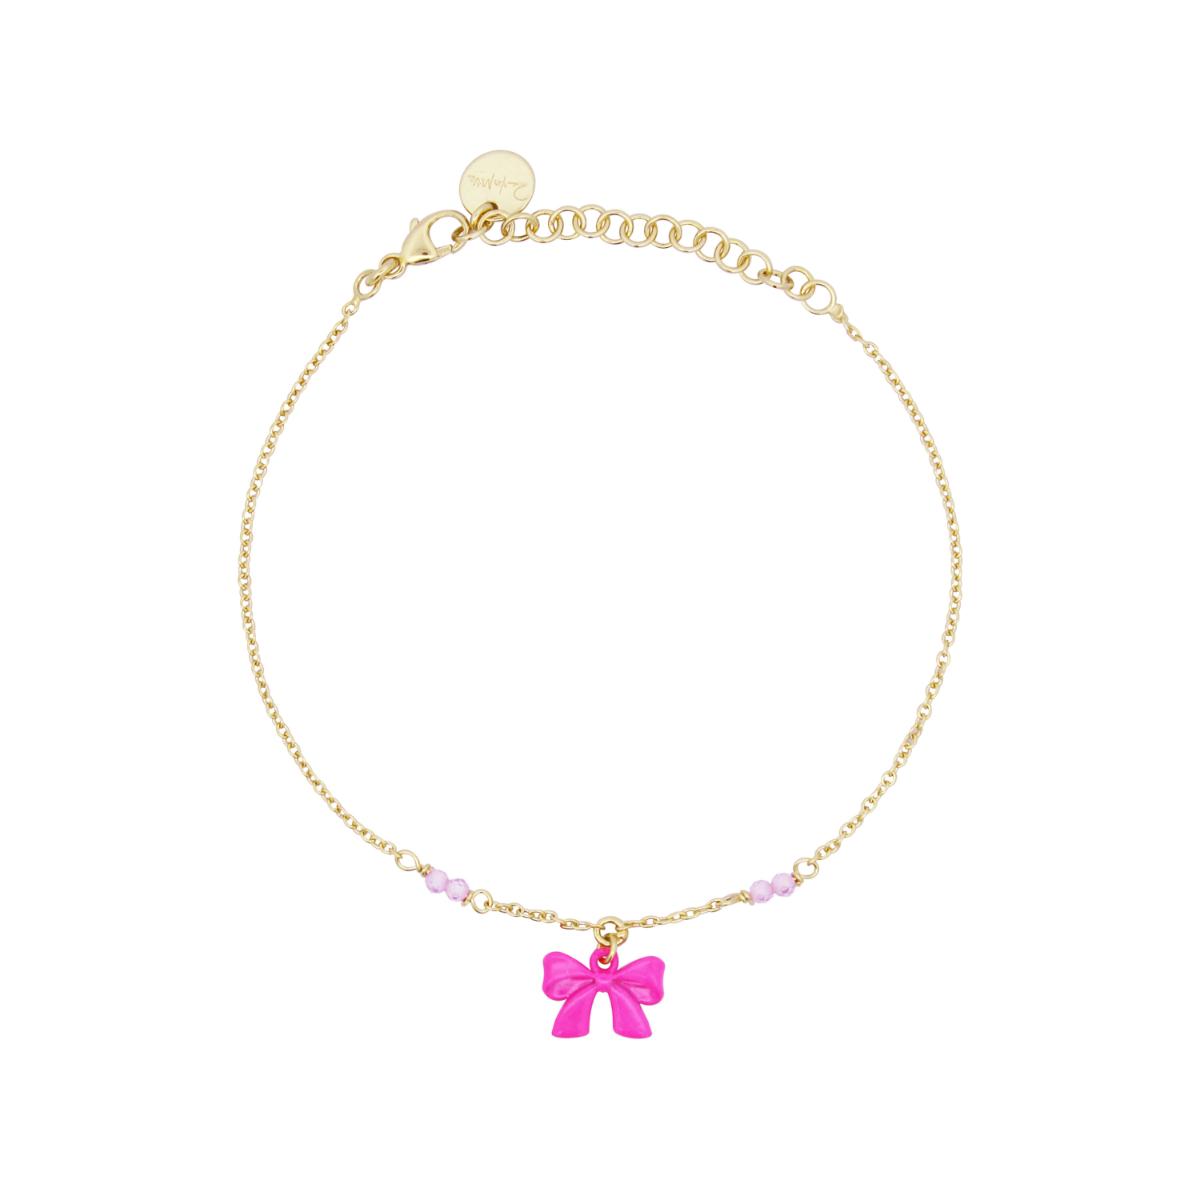 Bracelets - Customizable necklace with dangling letters and zirconia - 1 | Rue des Mille